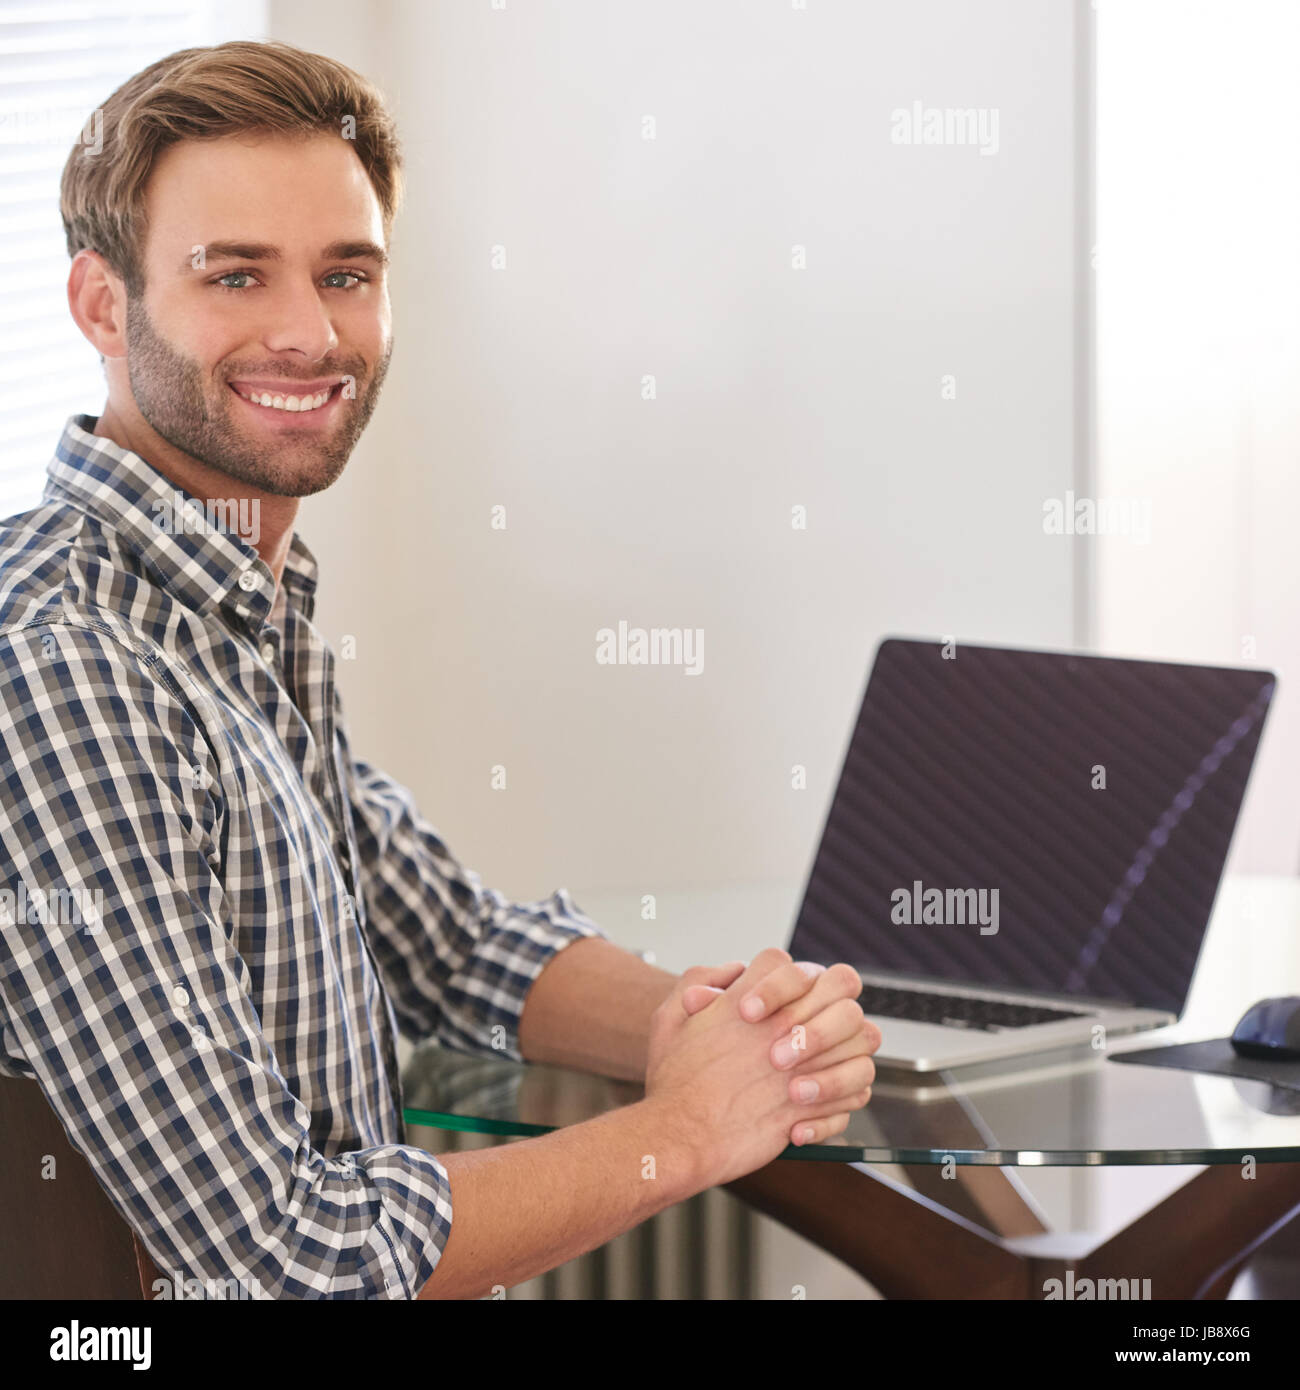 Handsome young man sitting behind his laptop in his living room at a glass table, smiling at the camera over his shoulder with a positive and producti Stock Photo